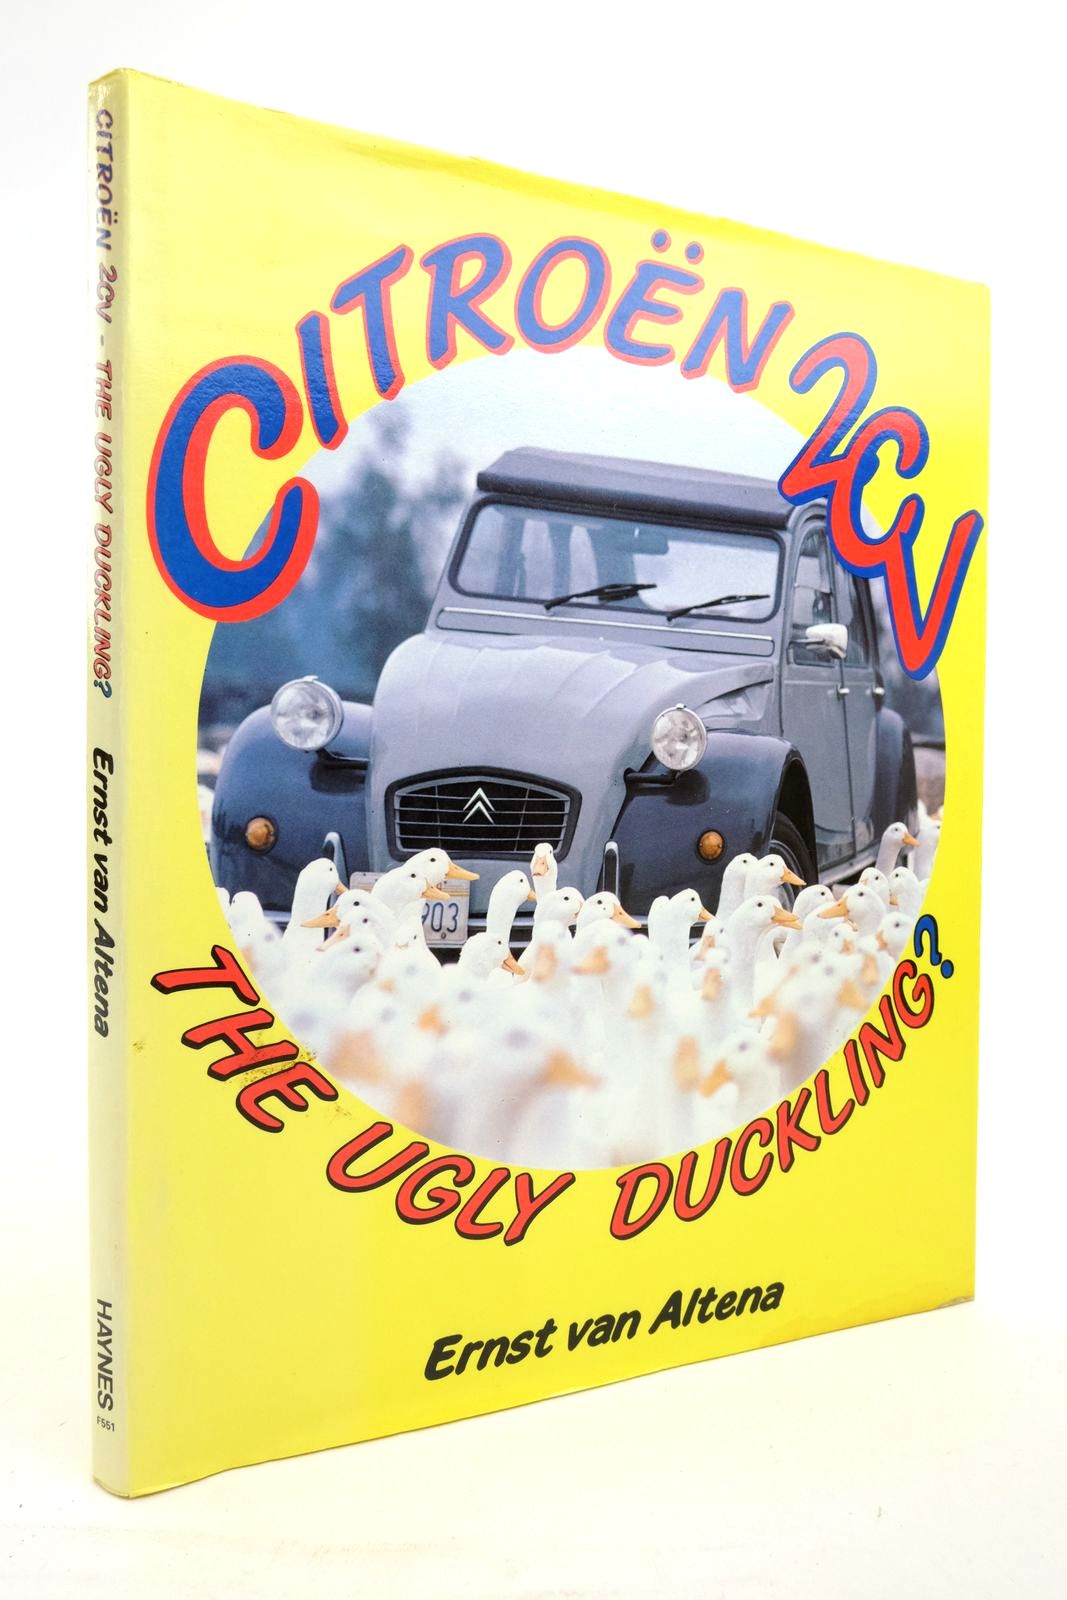 Photo of CITROEN 2CV THE UGLY DUCKLING? written by Van Altena, Ernst published by Haynes Publishing Group (STOCK CODE: 2137711)  for sale by Stella & Rose's Books